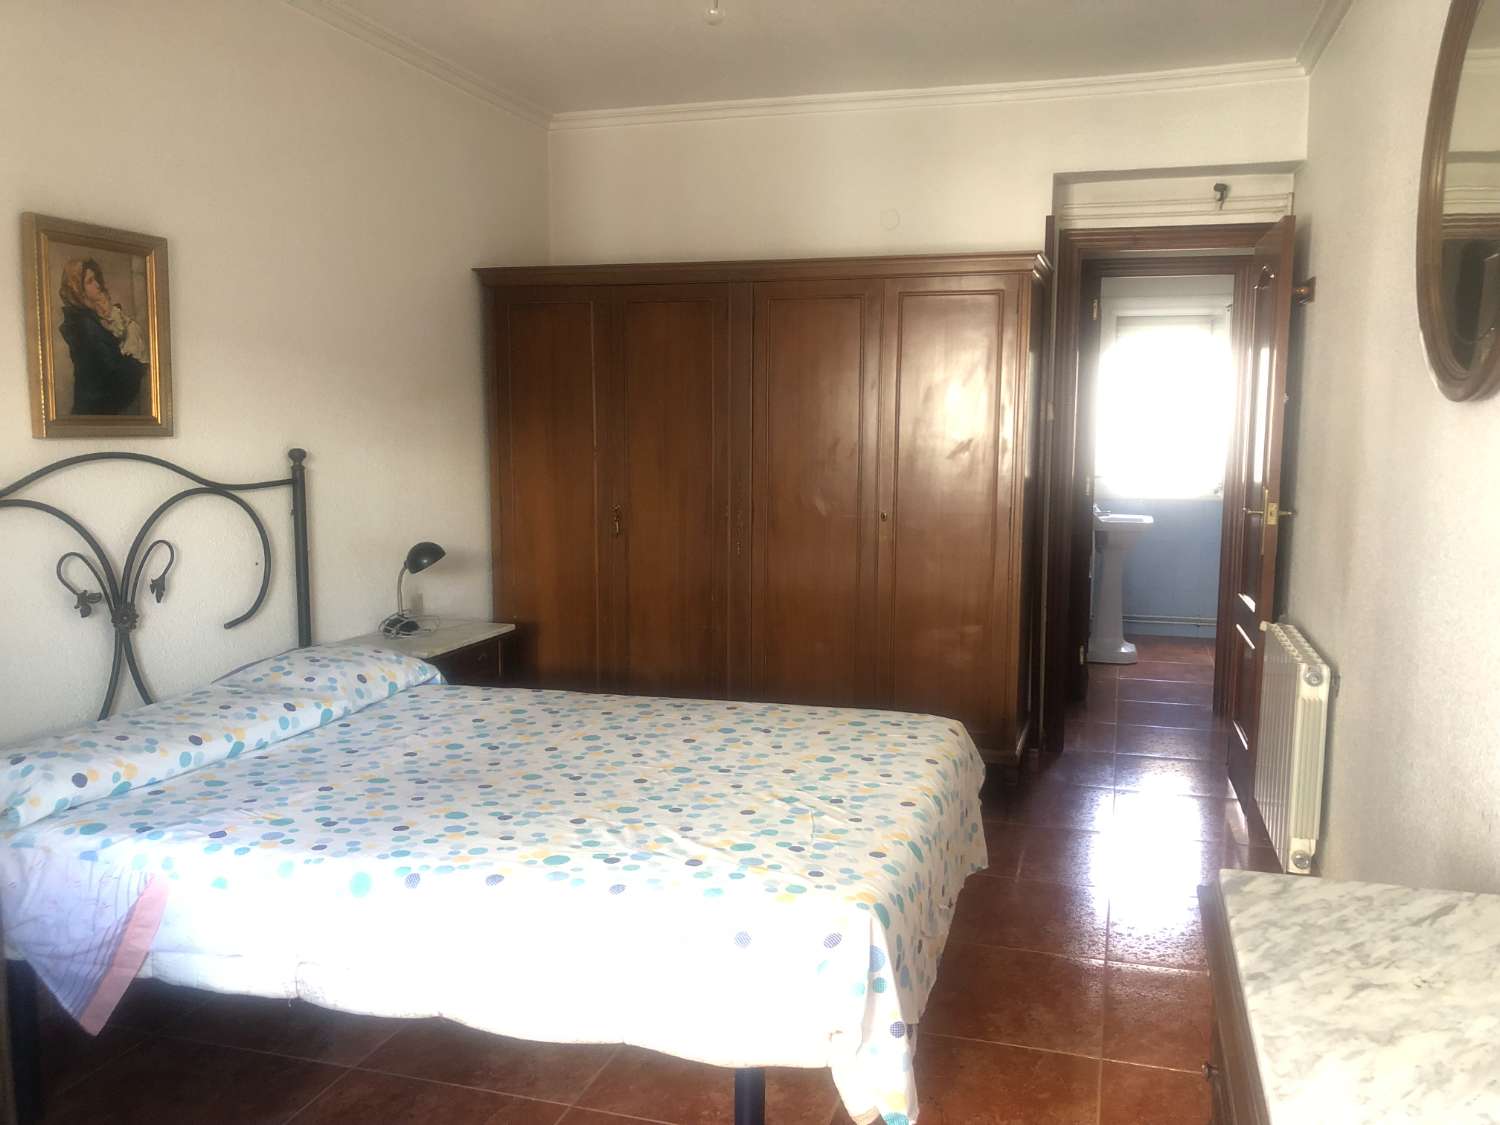 OCCASION APARTMENT IN THE CENTER NEXT TO RENFE